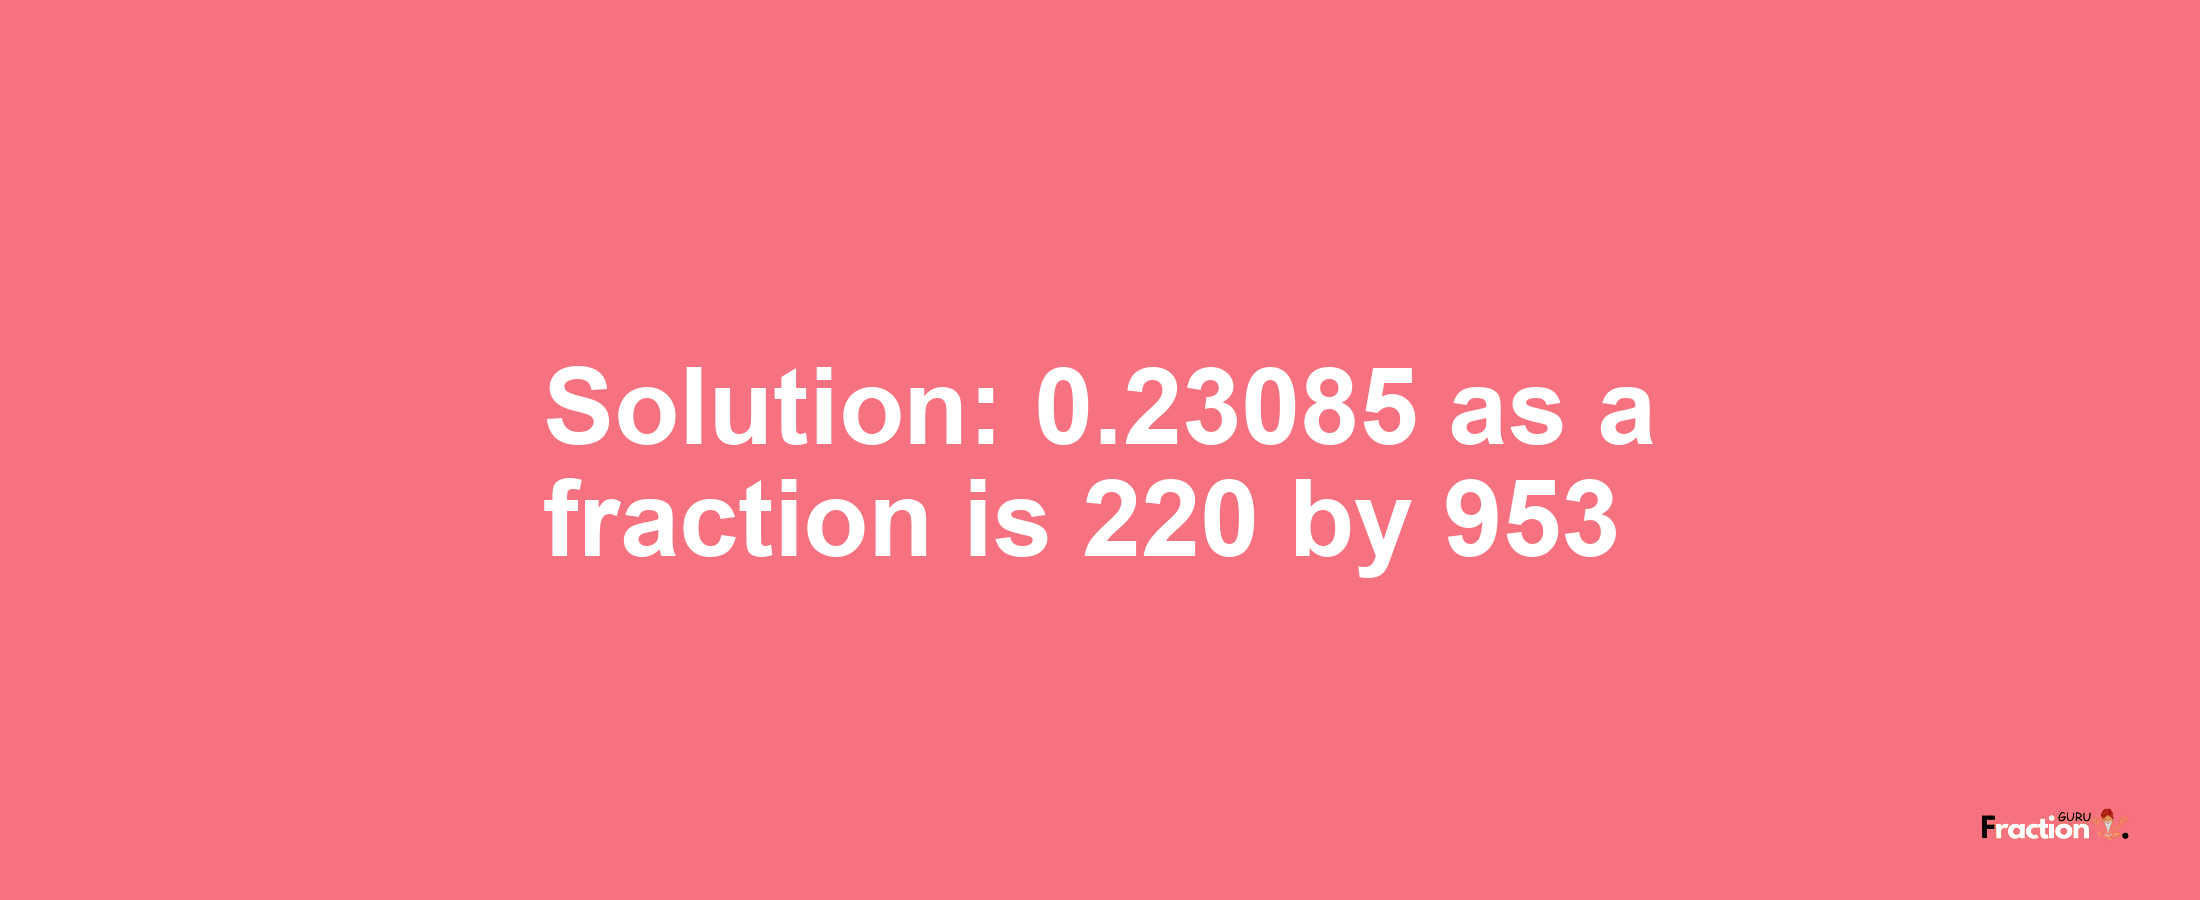 Solution:0.23085 as a fraction is 220/953